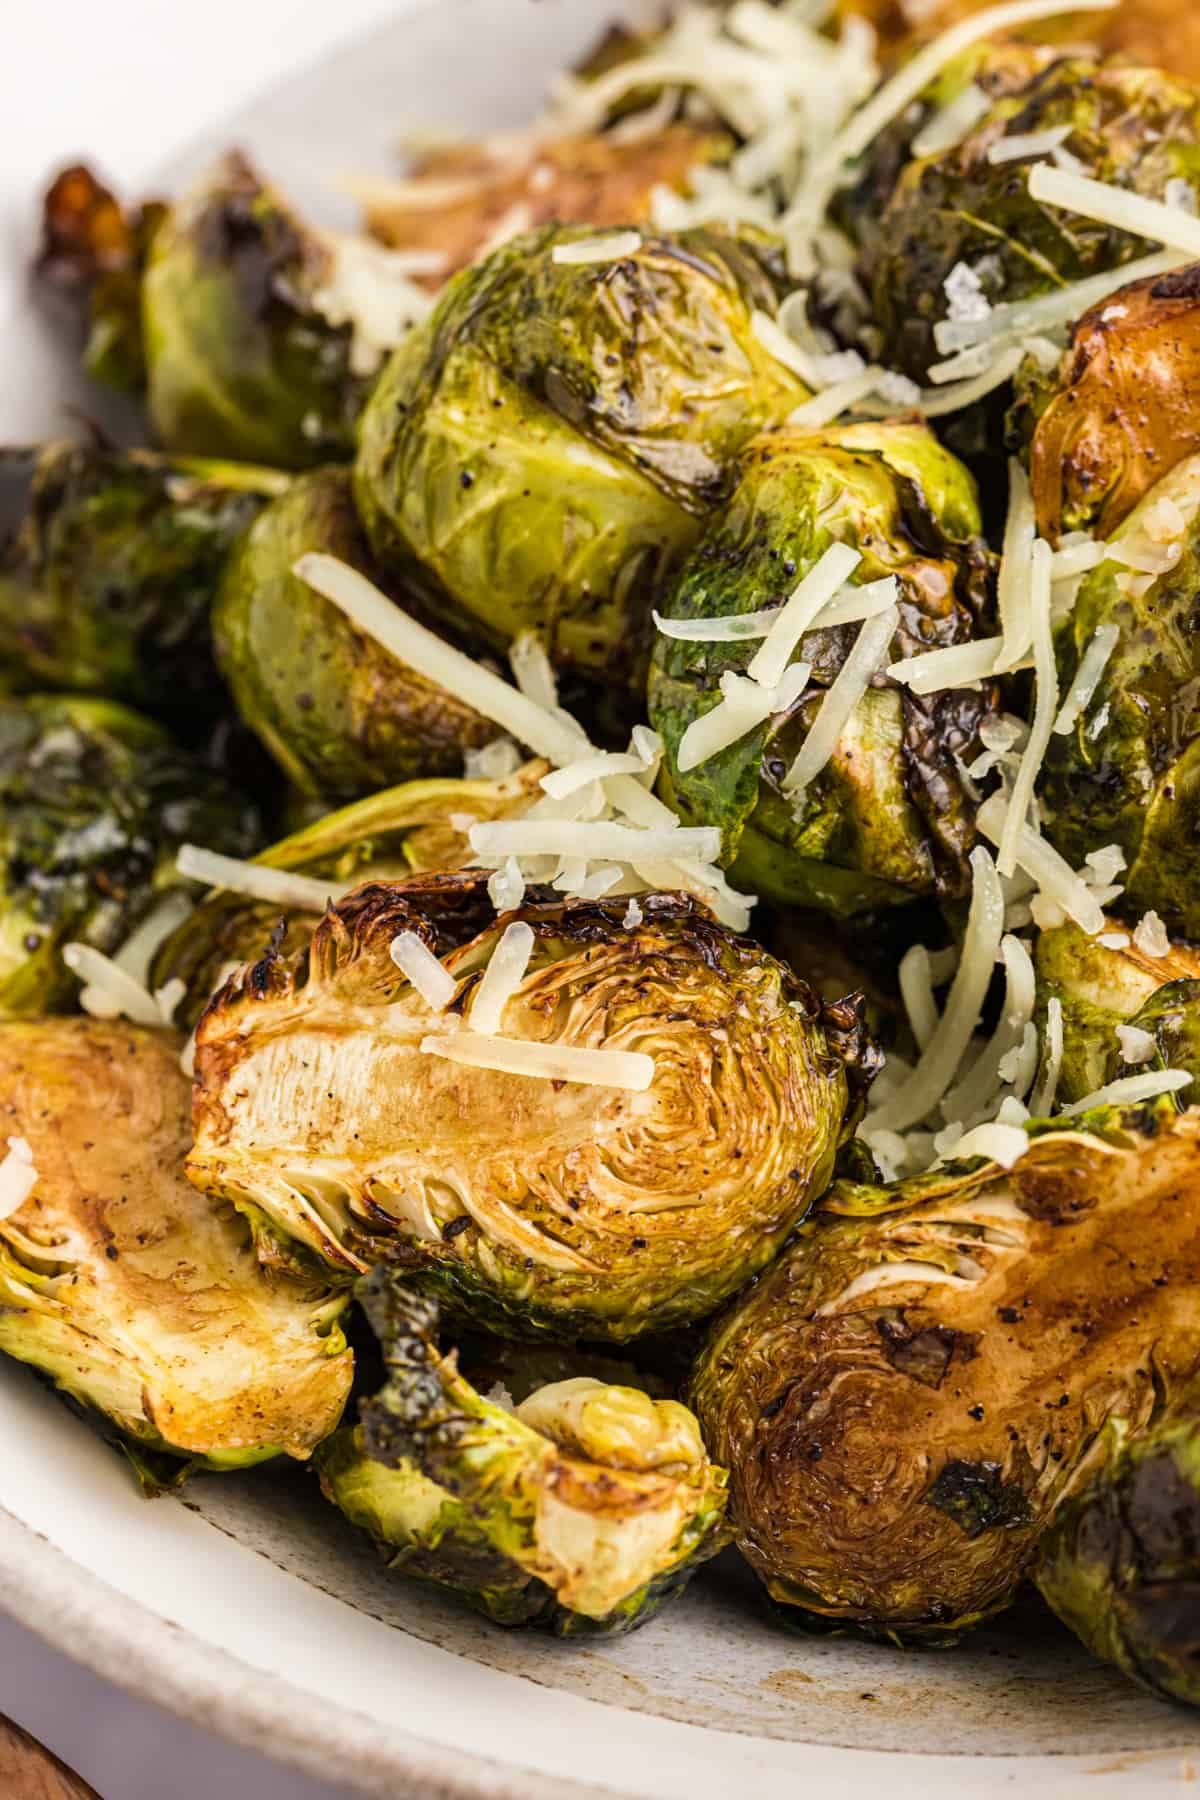 Shredded parmesan is sprinkled across the top of air fried brussels sprouts.